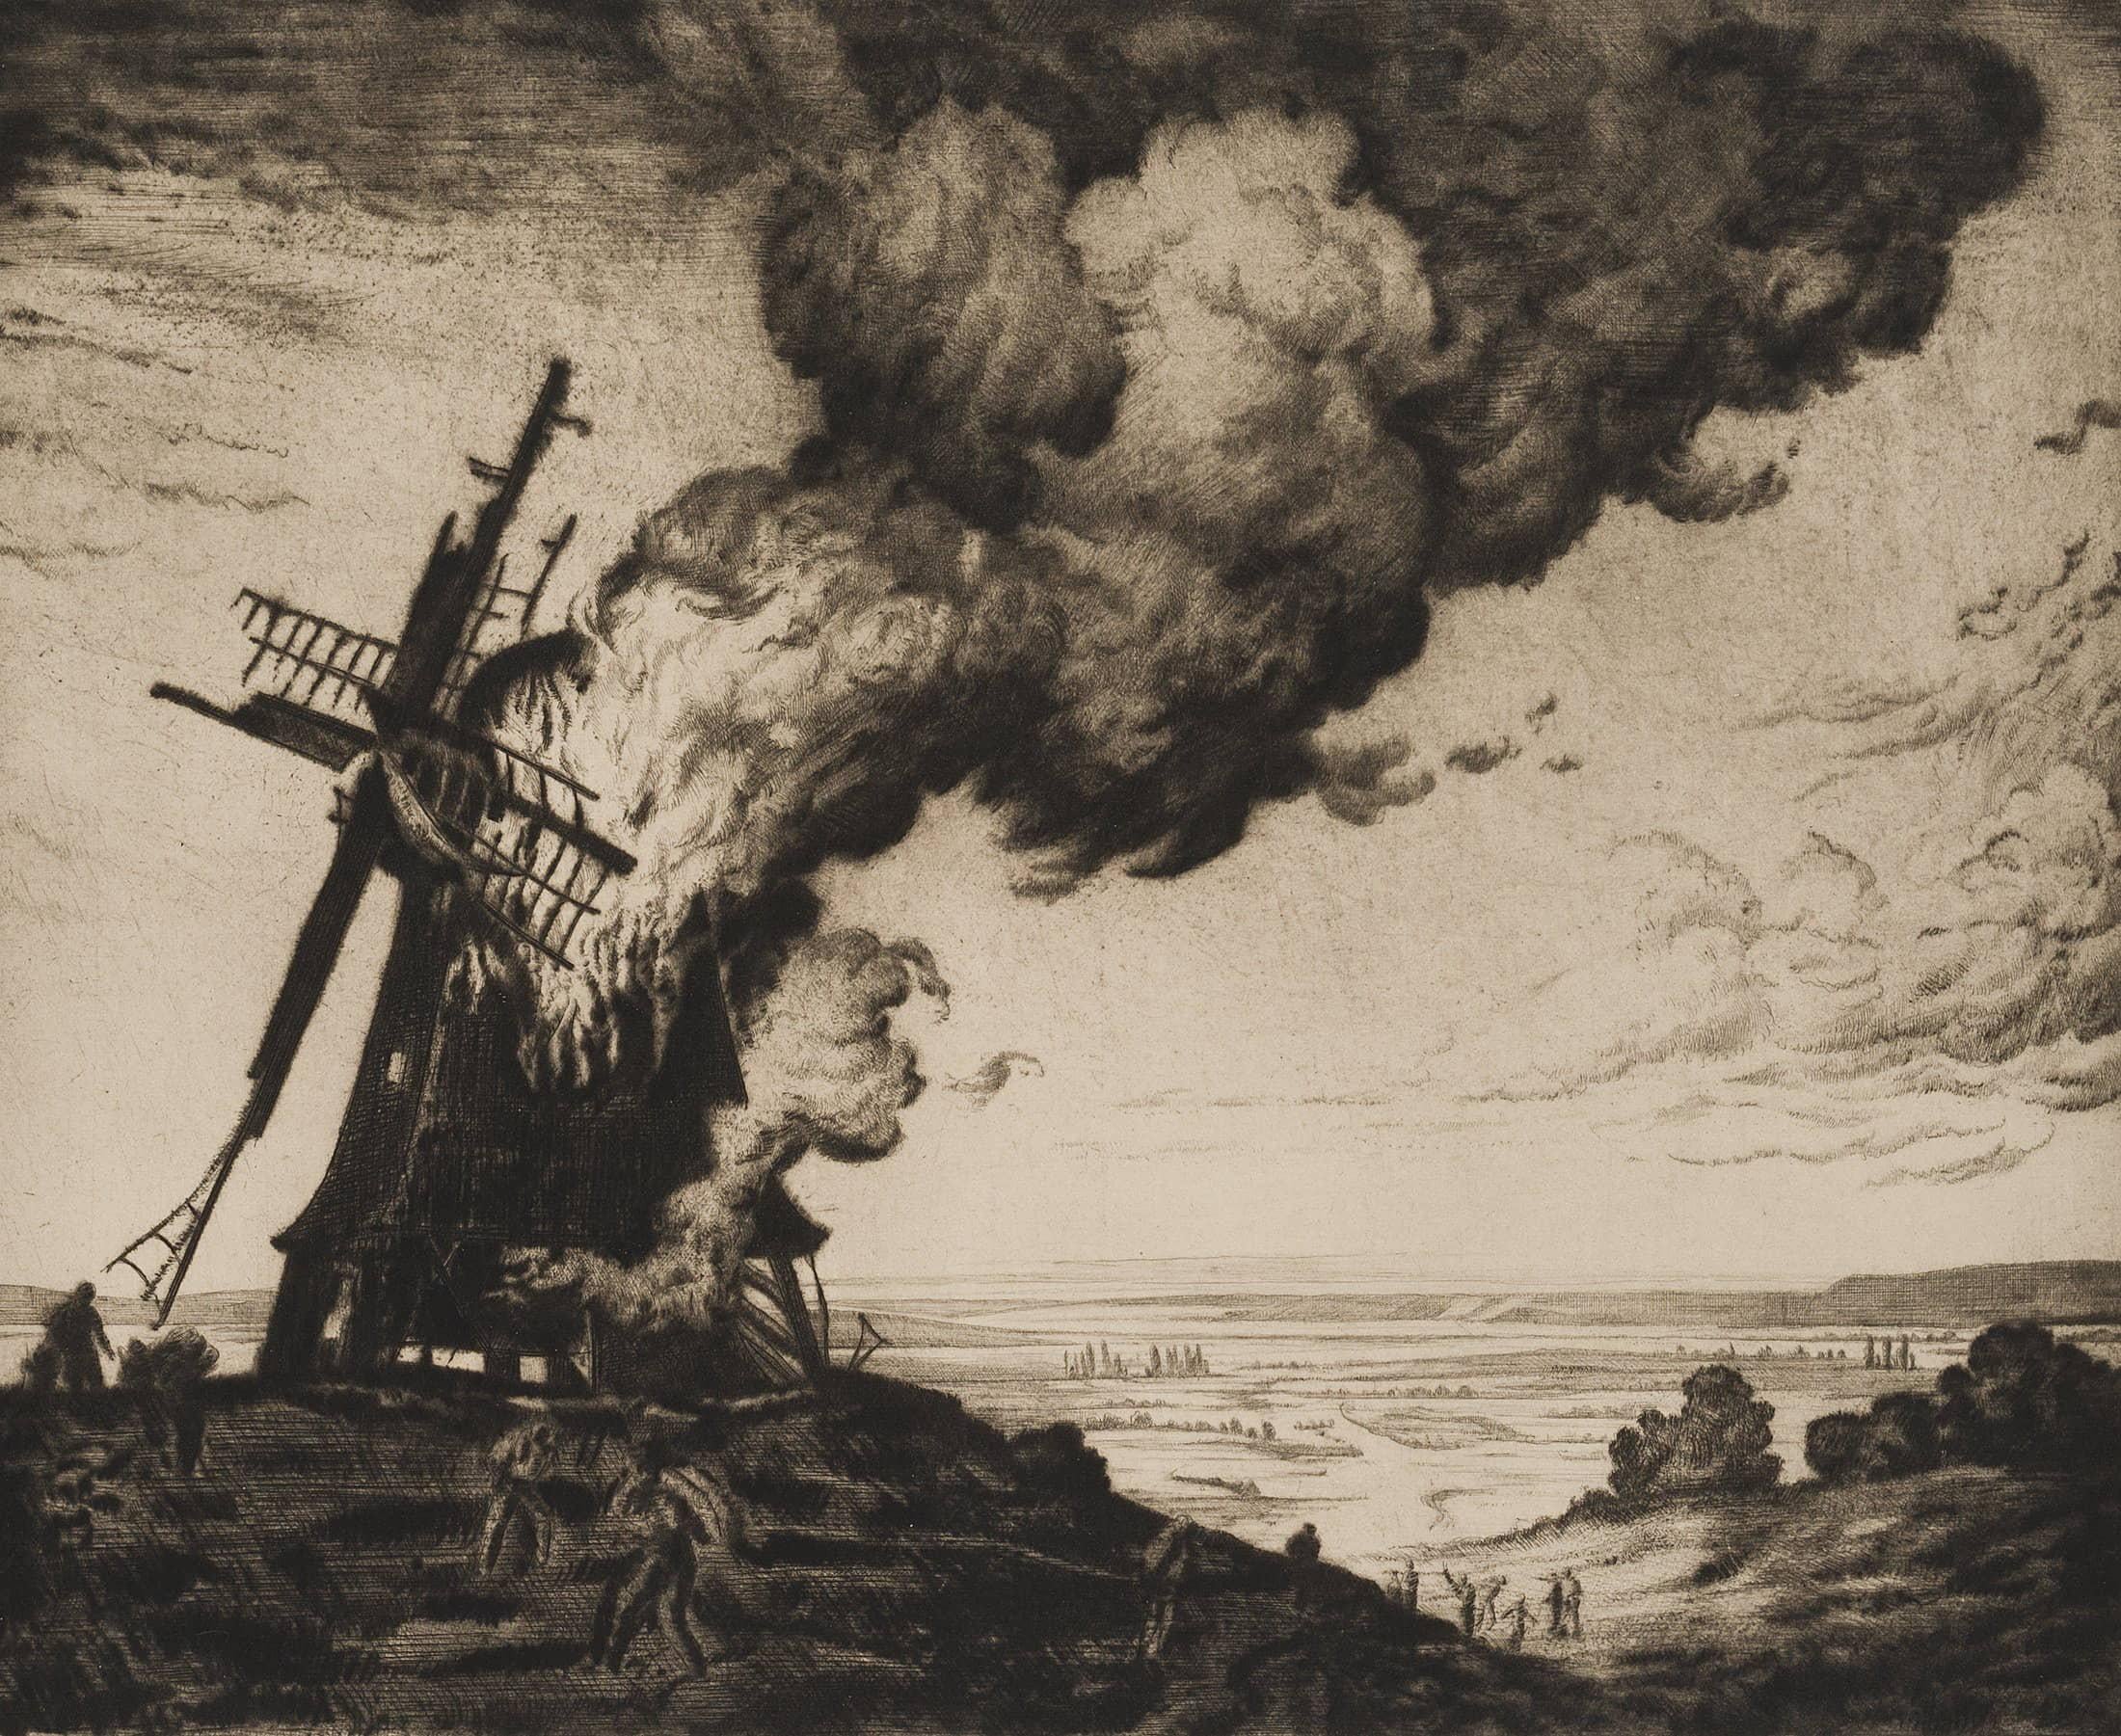 The mill fire